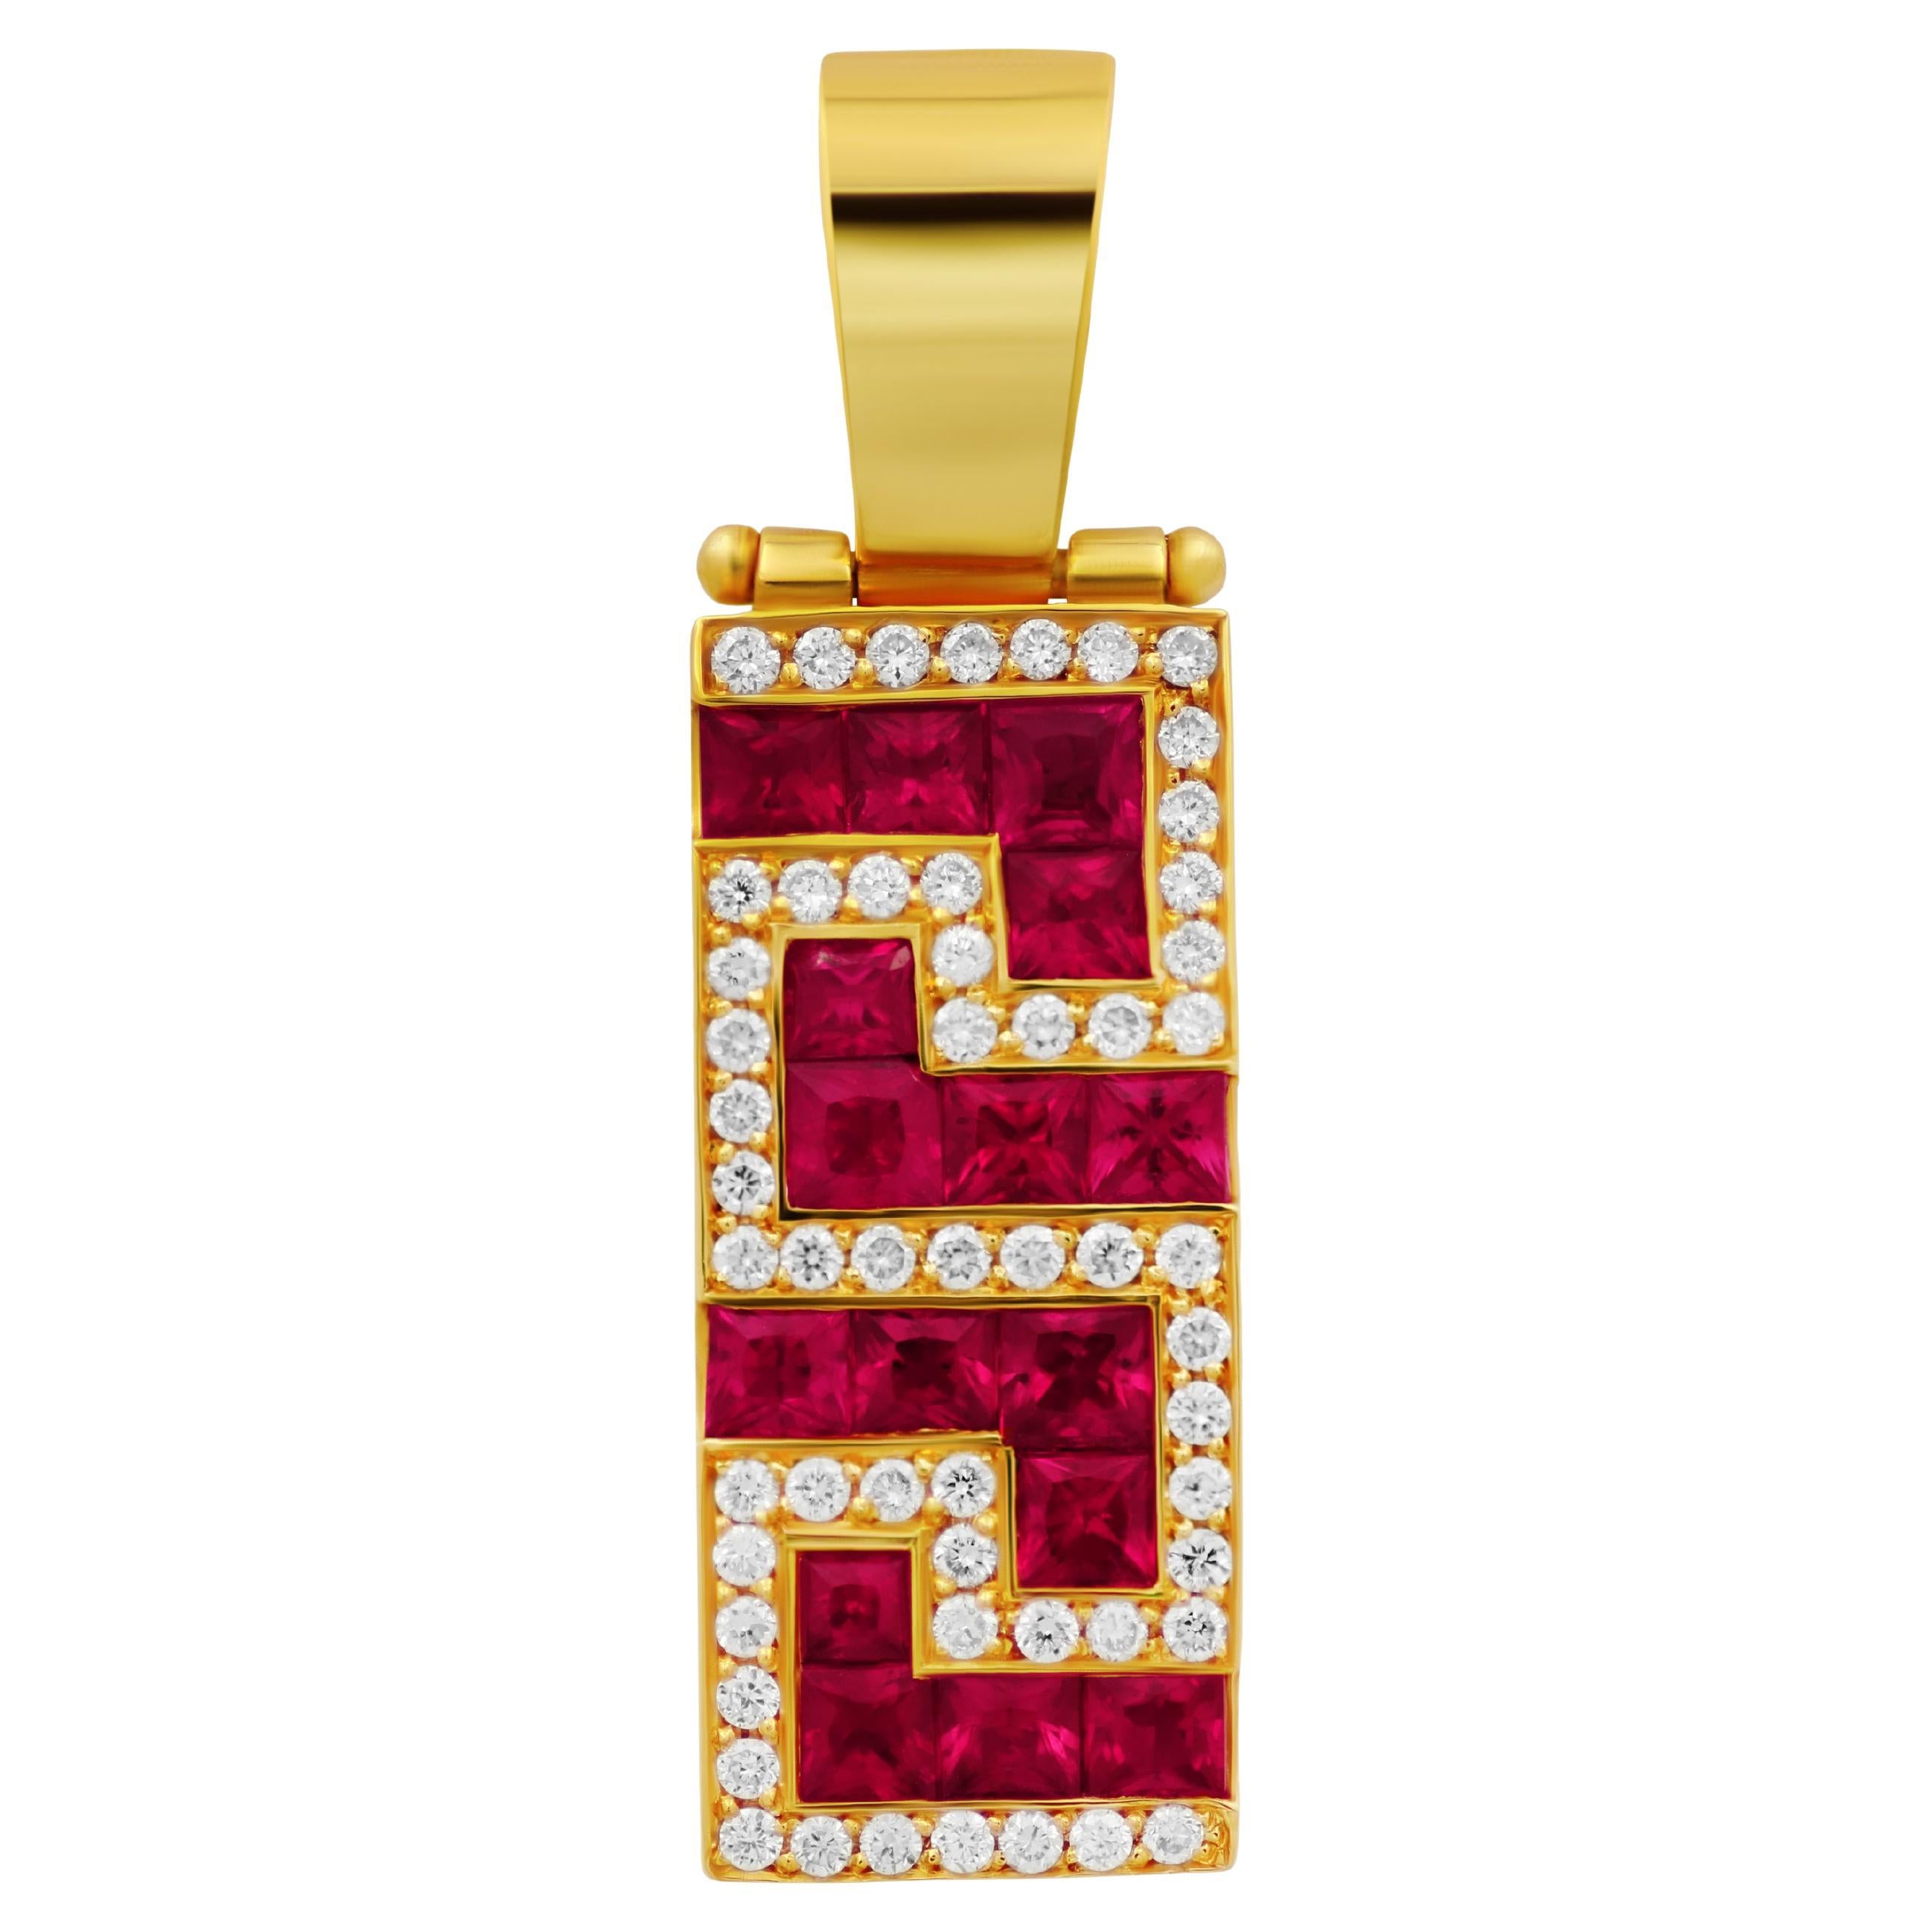 Dimos 18k Gold Greek Key Cocktail Rubies and Diamonds Pendant For Sale